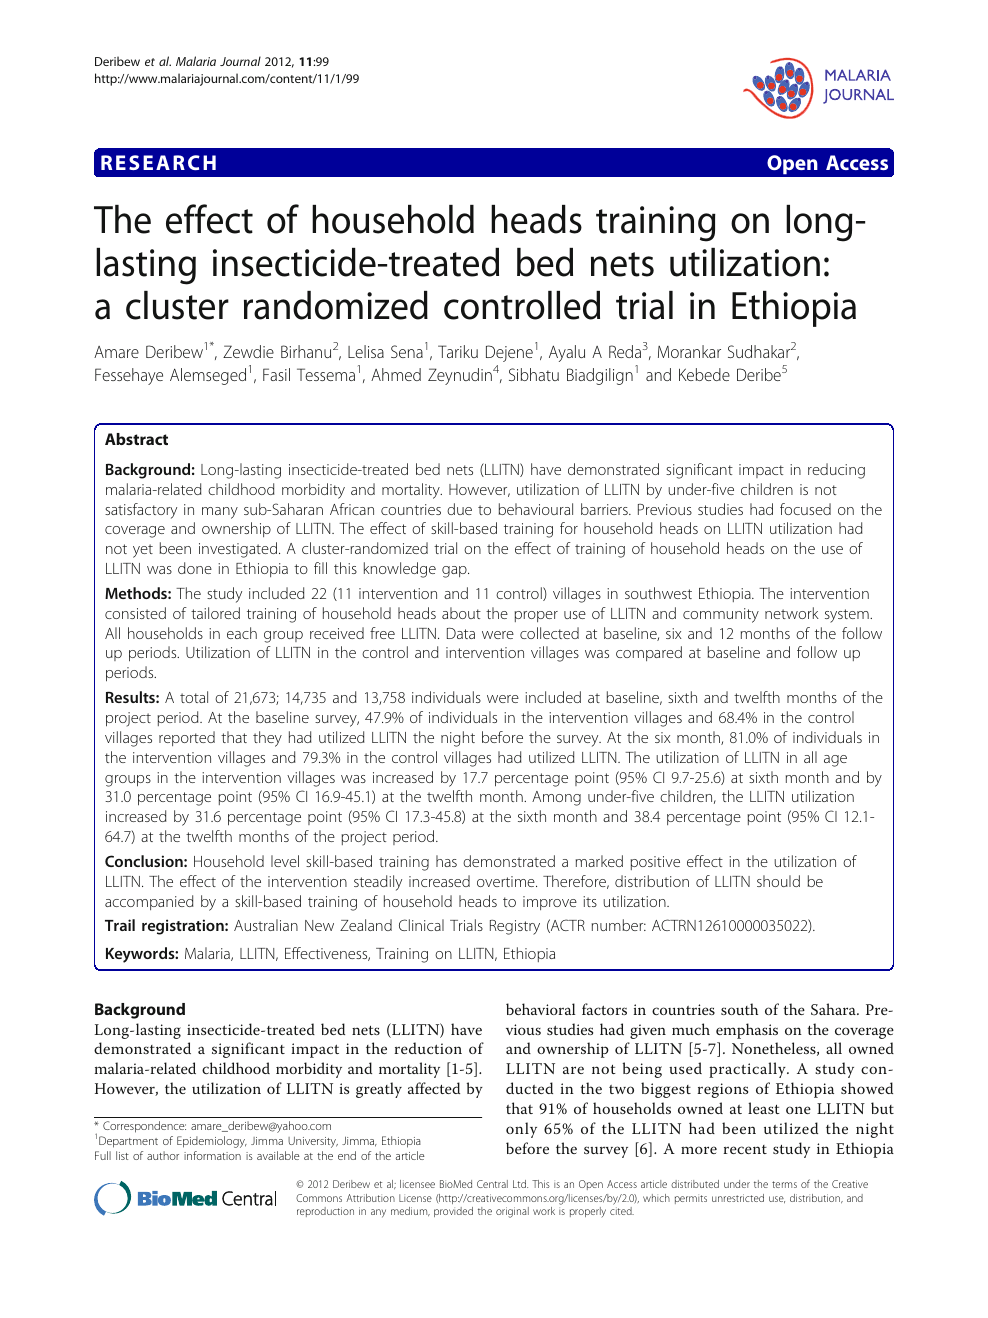 The Effect Of Household Heads Training On Long Lasting Insecticide Treated Bed Nets Utilization A Cluster Randomized Controlled Trial In Ethiopia Topic Of Research Paper In Health Sciences Download Scholarly Article Pdf And